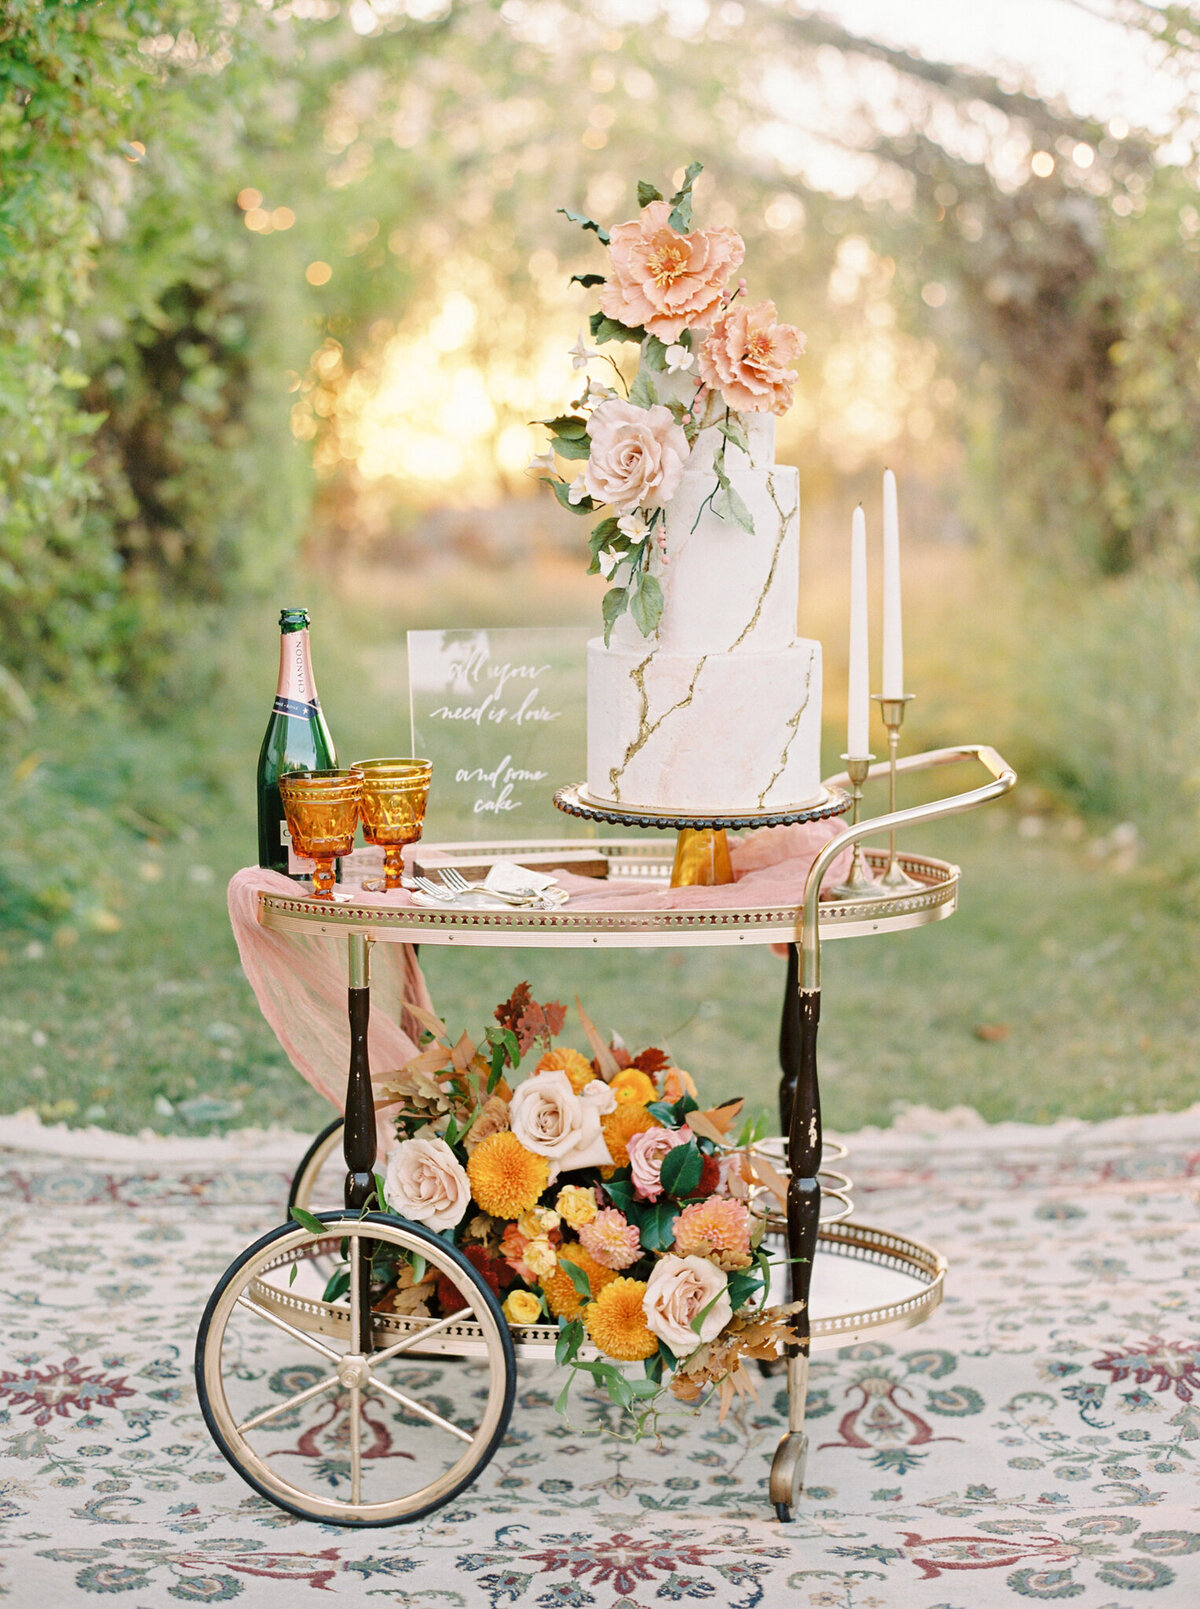 Stunning and romantic wedding cake display on an elegant gold cart, captured by Justine Milton Photography, fine art  wedding photographer & videographer in Calgary Alberta. Featured on the Bronte Bride Vendor Guide.